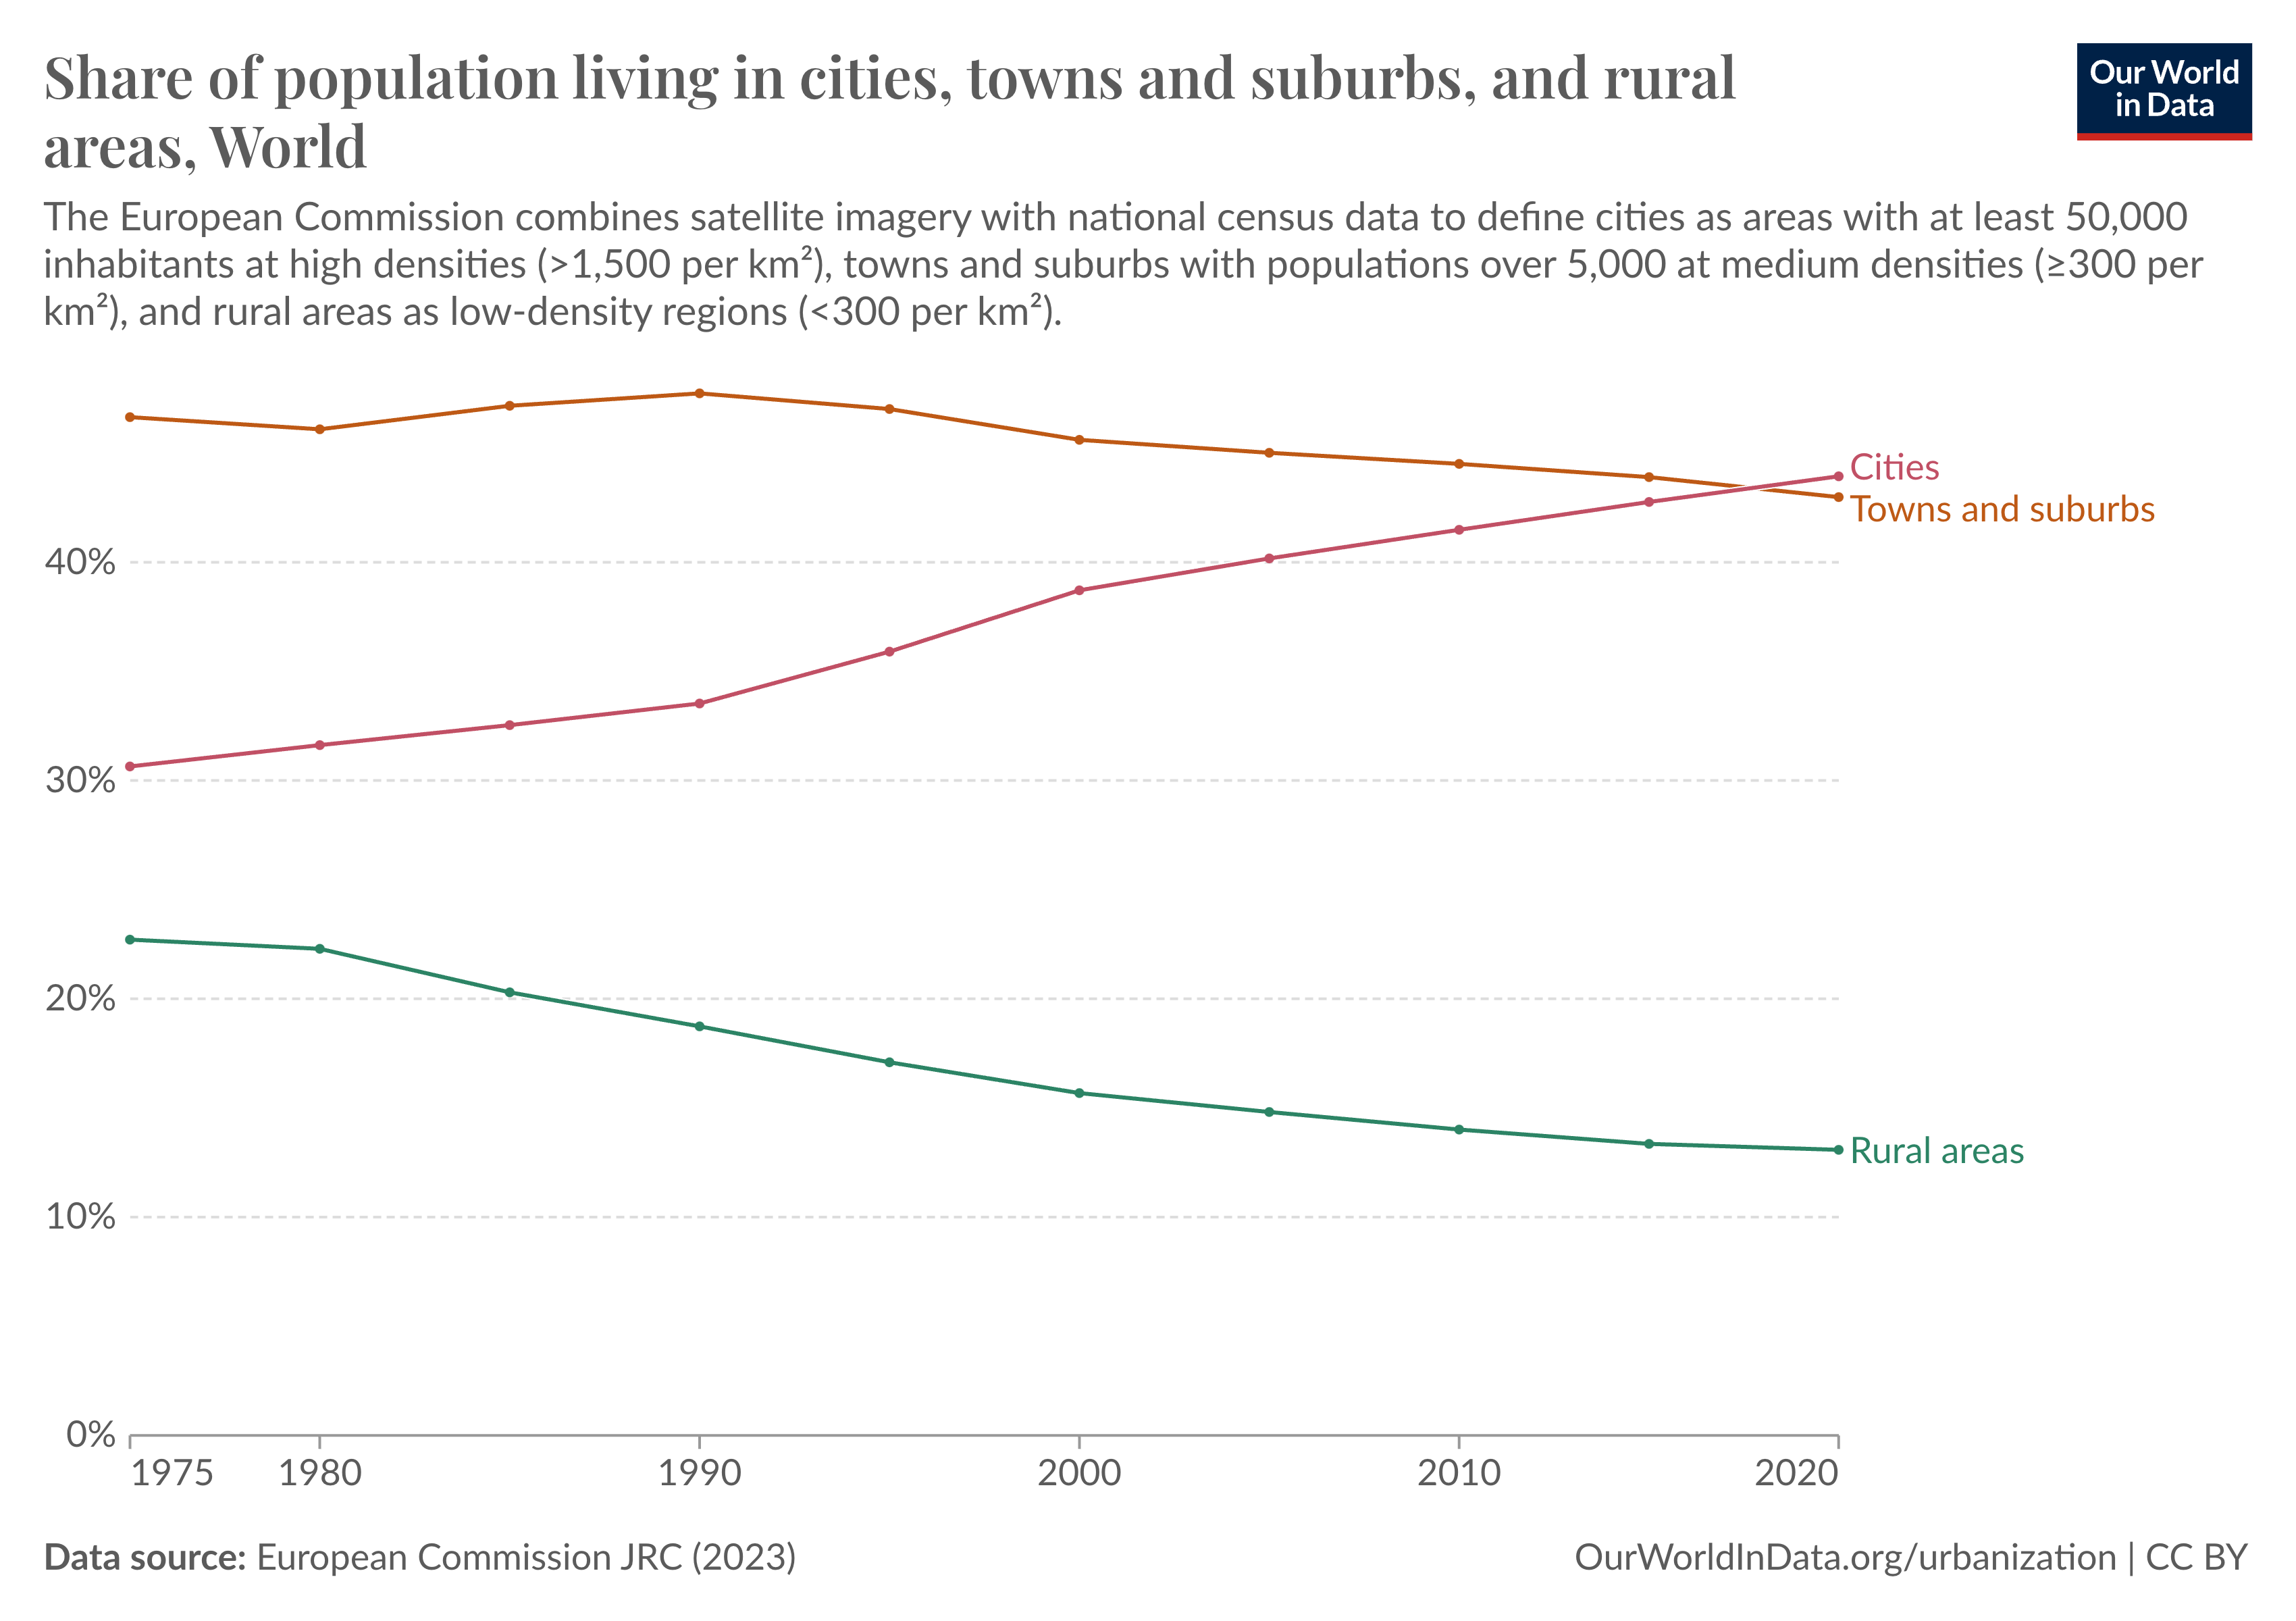 The majority of people in the world now live in cities